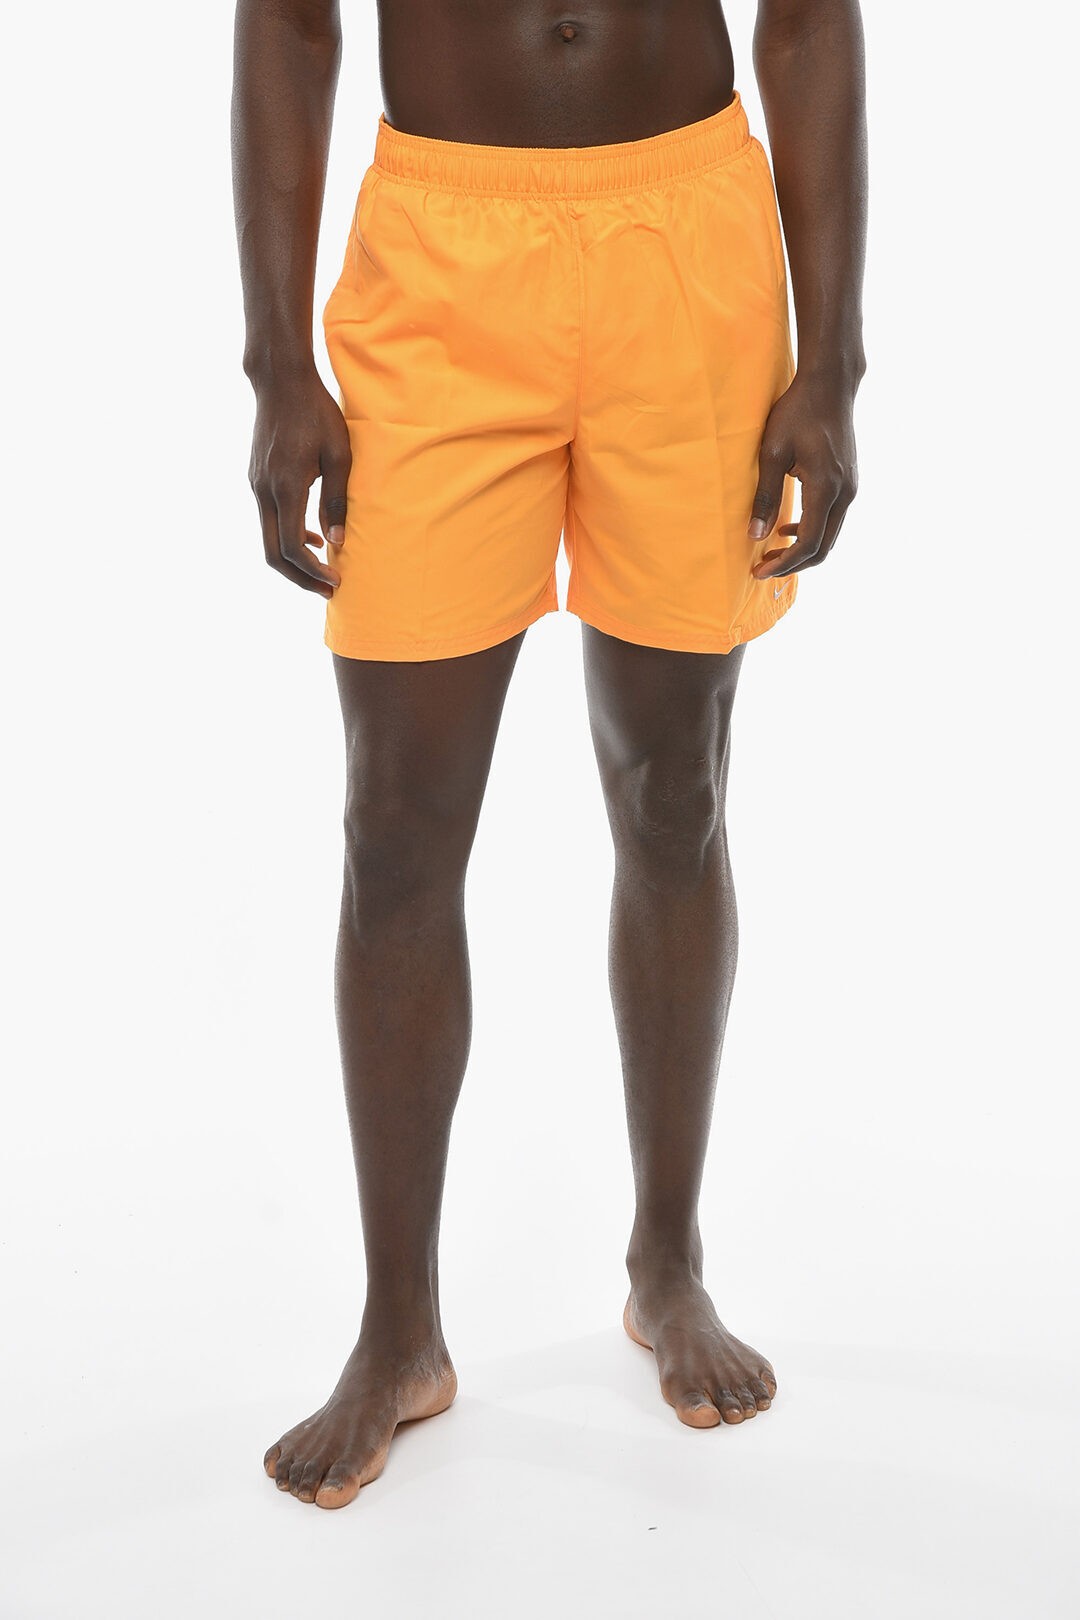 NIKE iCL XCEFA NESSA559-724 Y SWIM SOLID COLOR SWIM SHORTS WITH EMBROIDERED LOGO y֐ŁEzybsOz dk